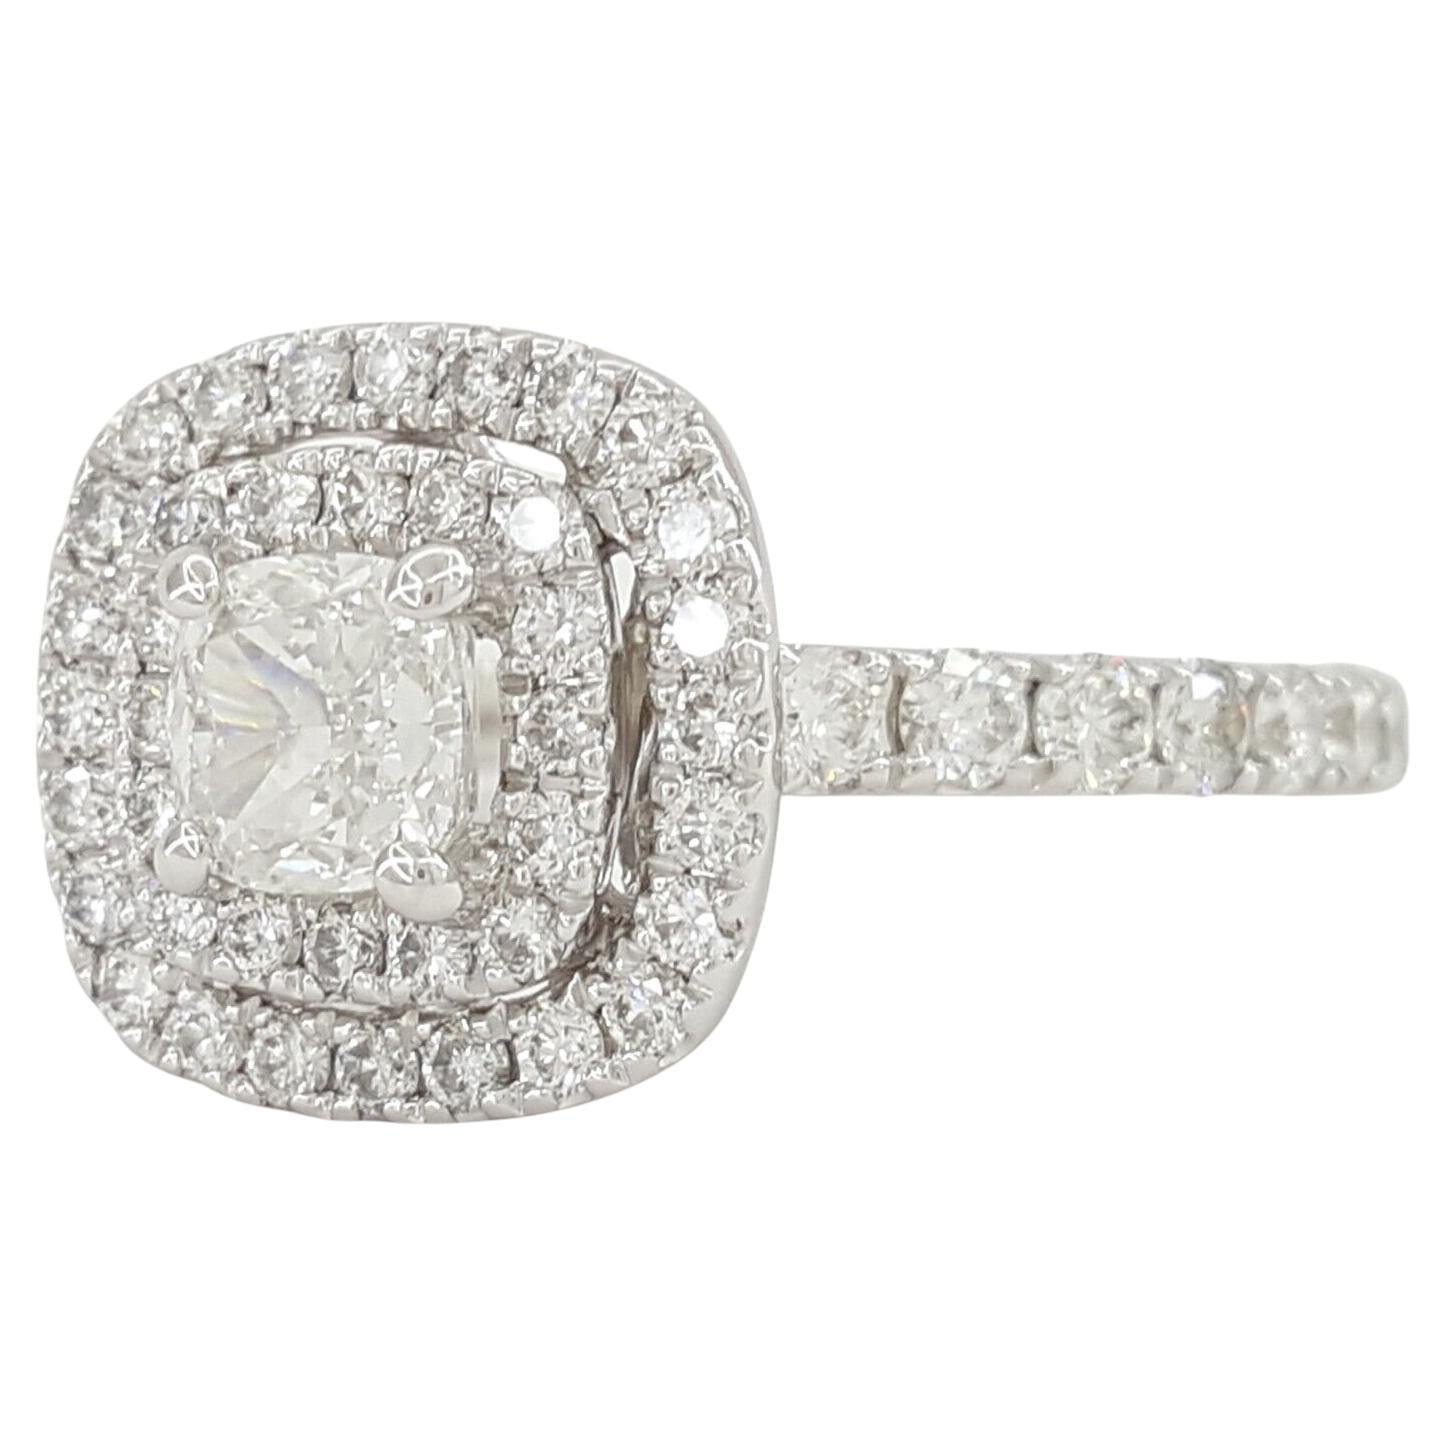  Neil Lane Cushion Cut Diamond Double Halo Ring In Excellent Condition For Sale In Rome, IT